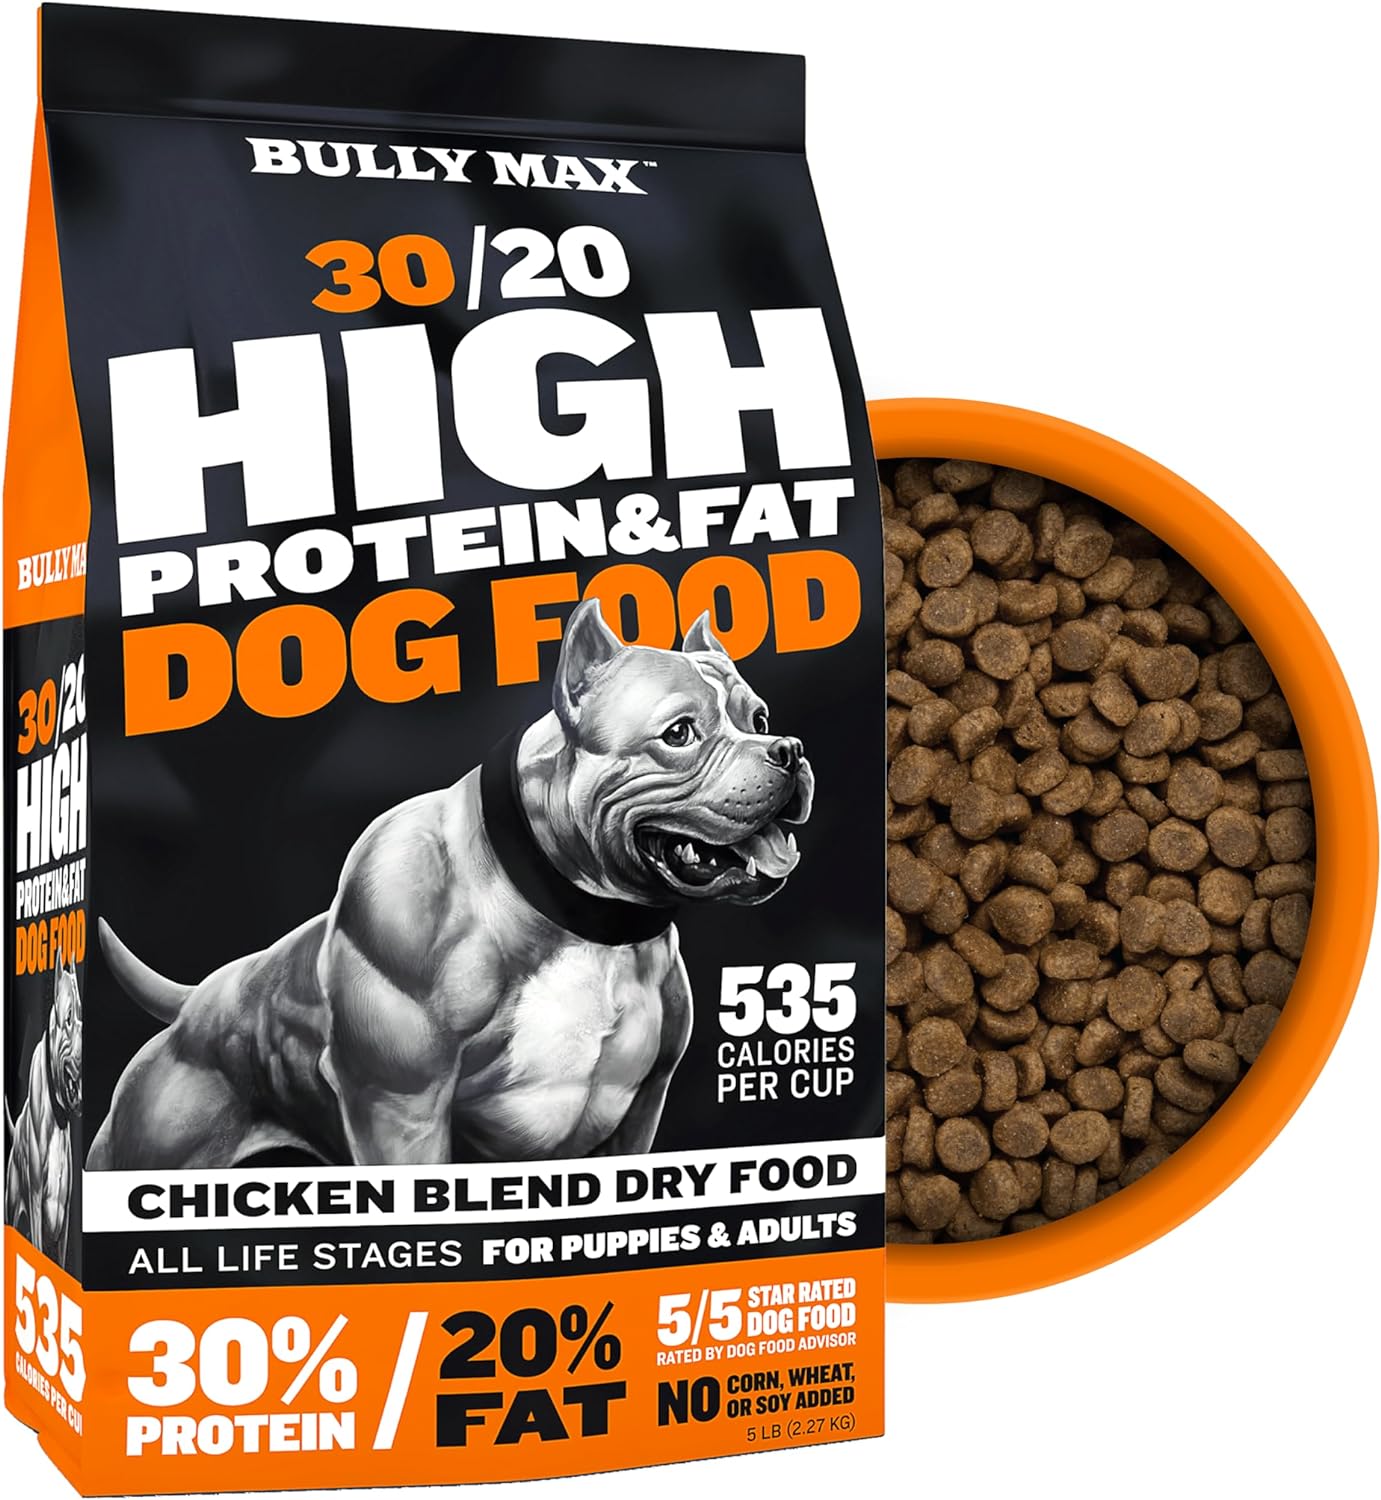 Bully Max High Performance Super Premium Dry Dog Food for All Ages - High Protein Puppy Food for Small & Large Breed Puppies and Adult Dogs (535 Calories Per Cup for Muscle & Weight Gain), 5 lb. Bag